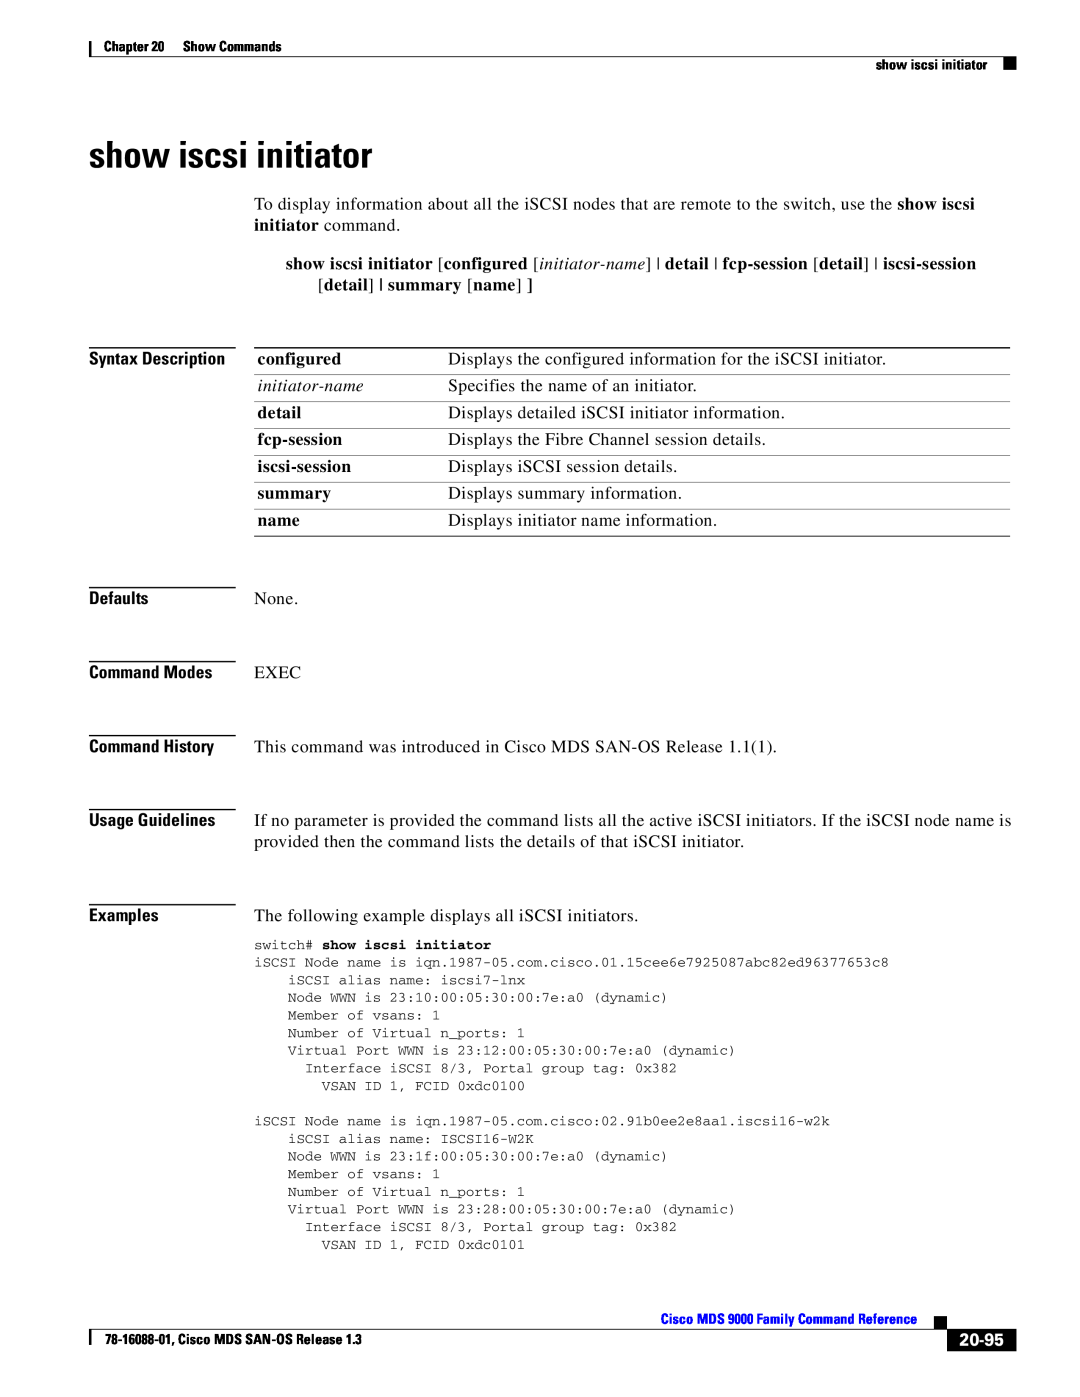 Cisco Systems MDS 9000 manual show iscsi initiator, detail summary name, initiator-name, fcp-session, iscsi-session, 20-95 